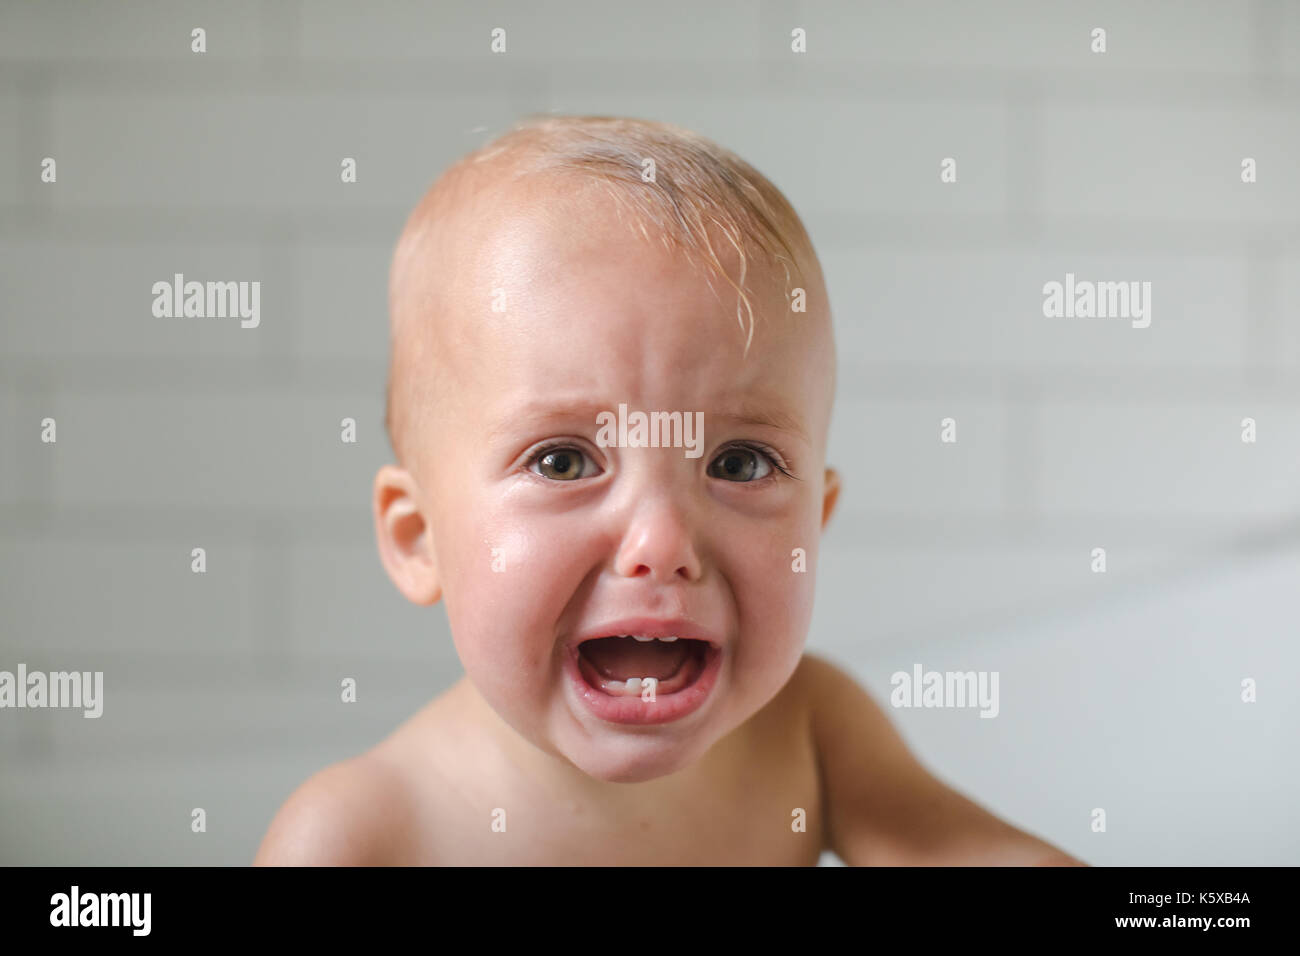 One-year-old baby cries close-up six teeth visible on a white background Stock Photo